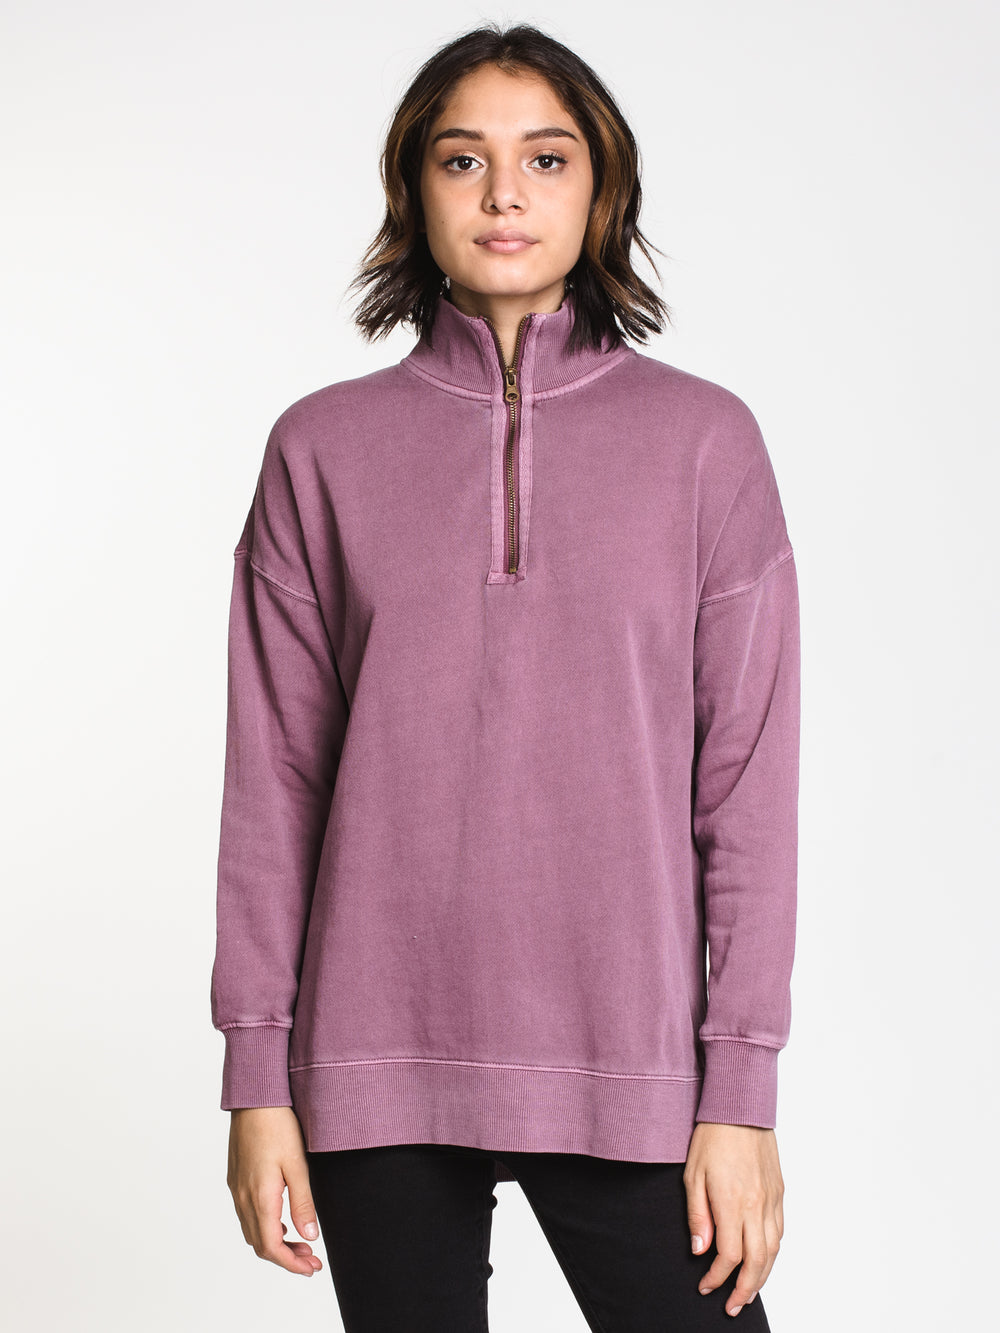 WOMENS BRYNLEE QUARTER ZIP - CLEARANCE